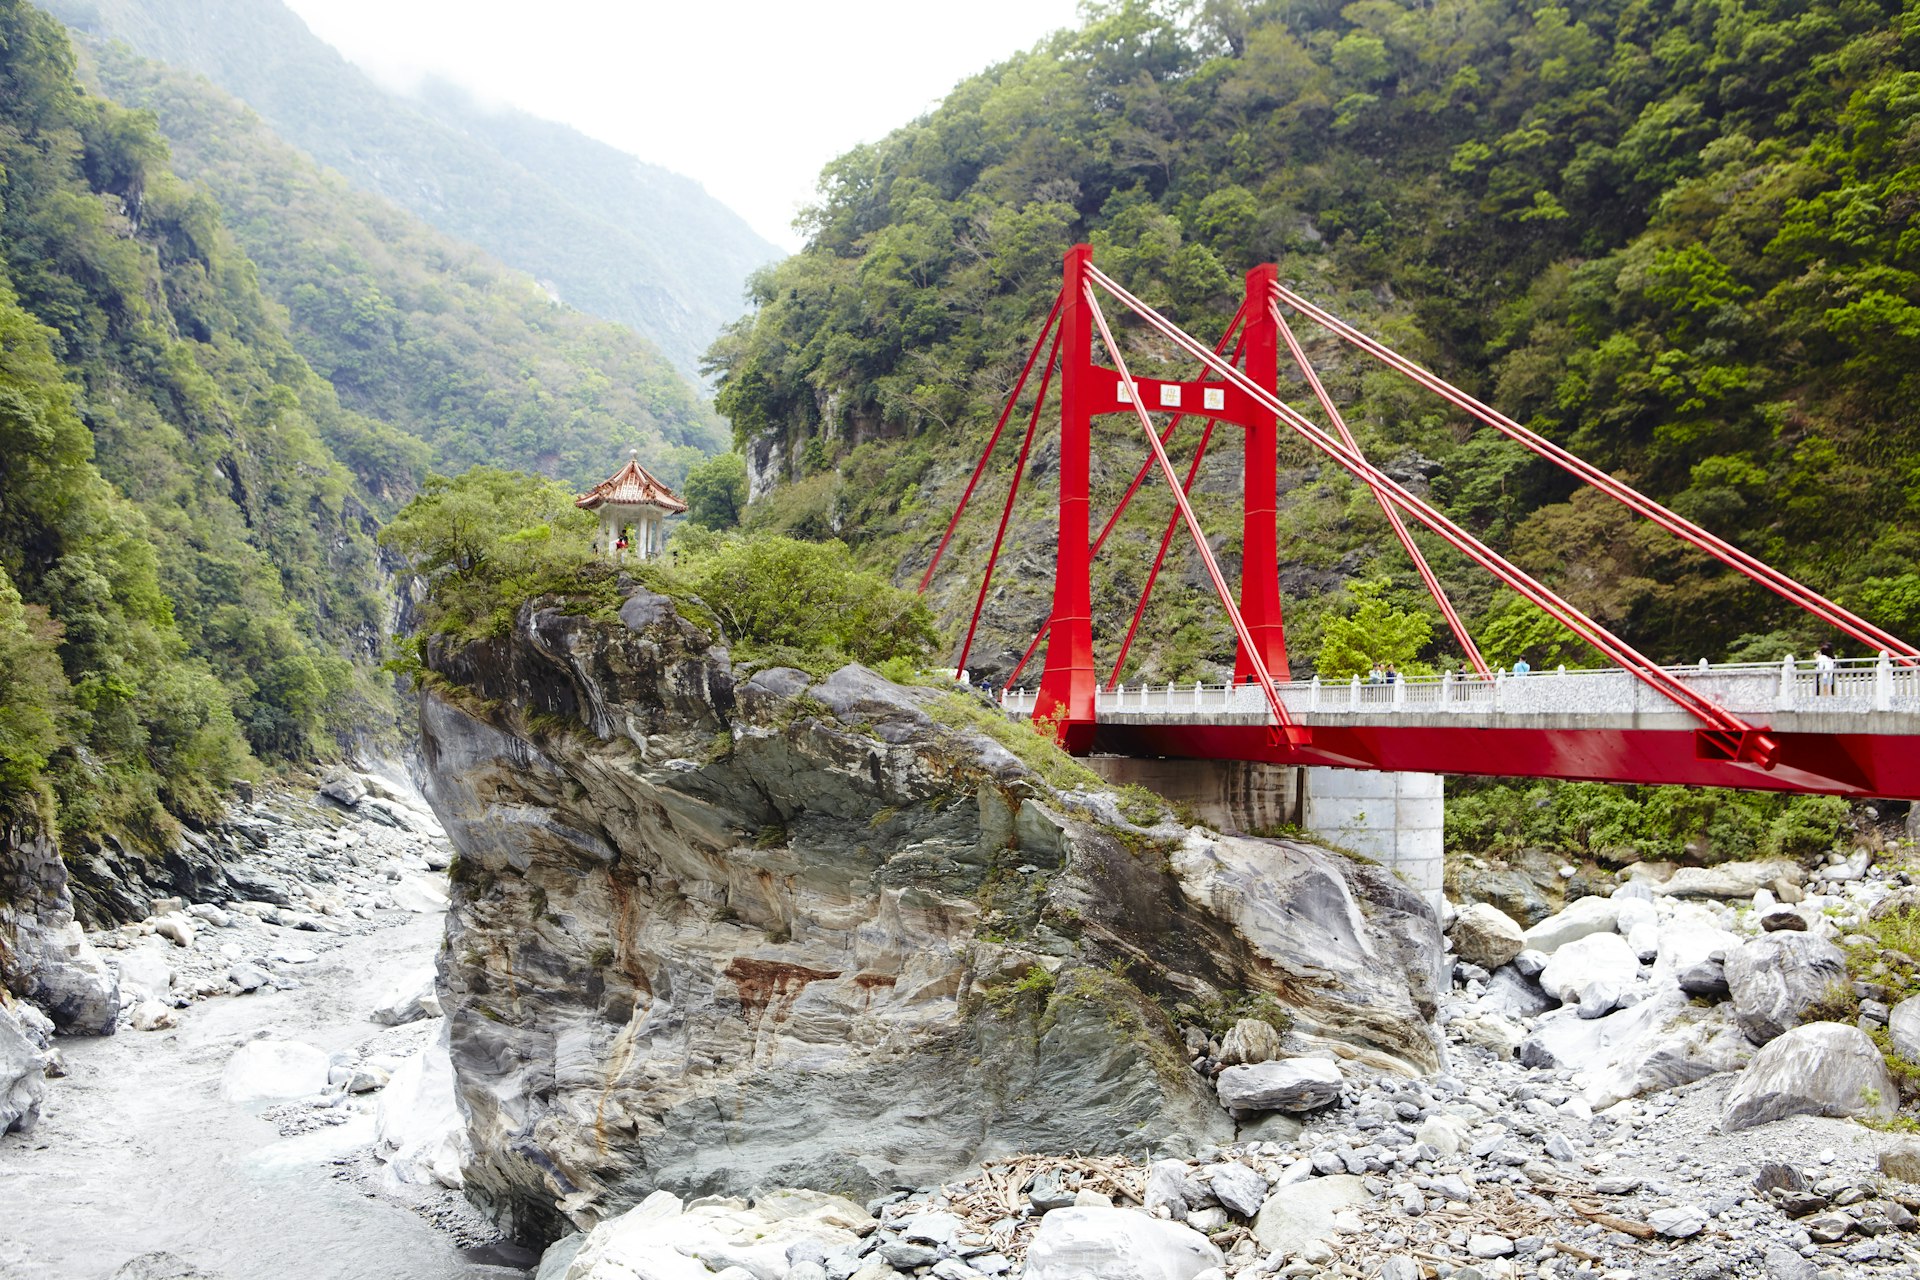 A red iron bridge leads to a small riverside pavilion